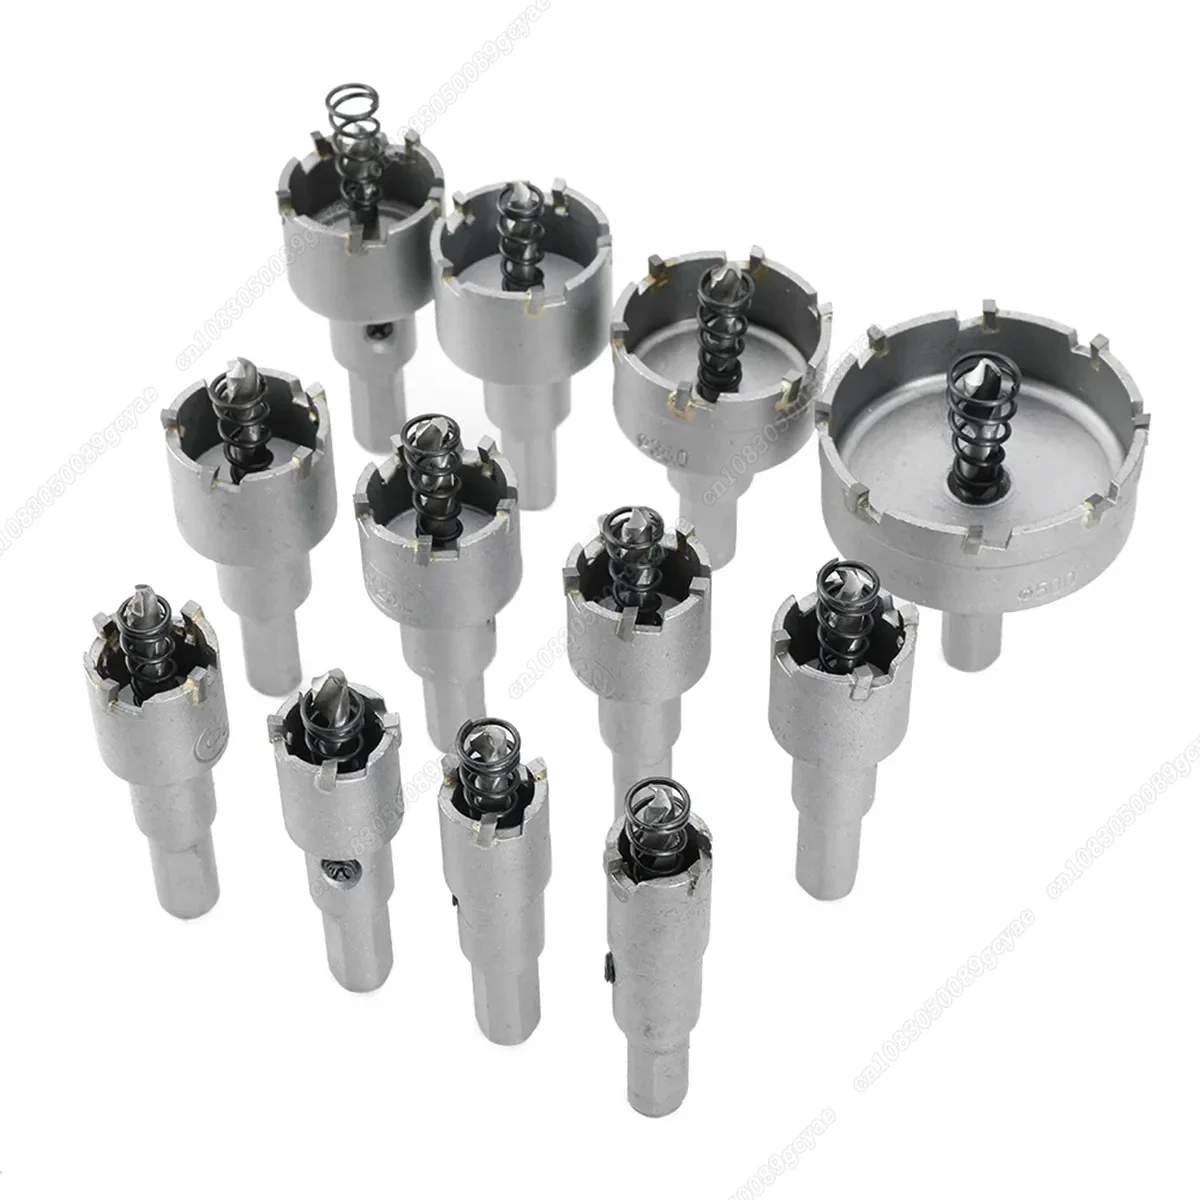 

12Pcs 15mm-50mm Metal Hole Saw Tooth Kit Drill Bit Set Stainless Steel Alloy Wood Cutter Universal Metal Cutter Tool Durable